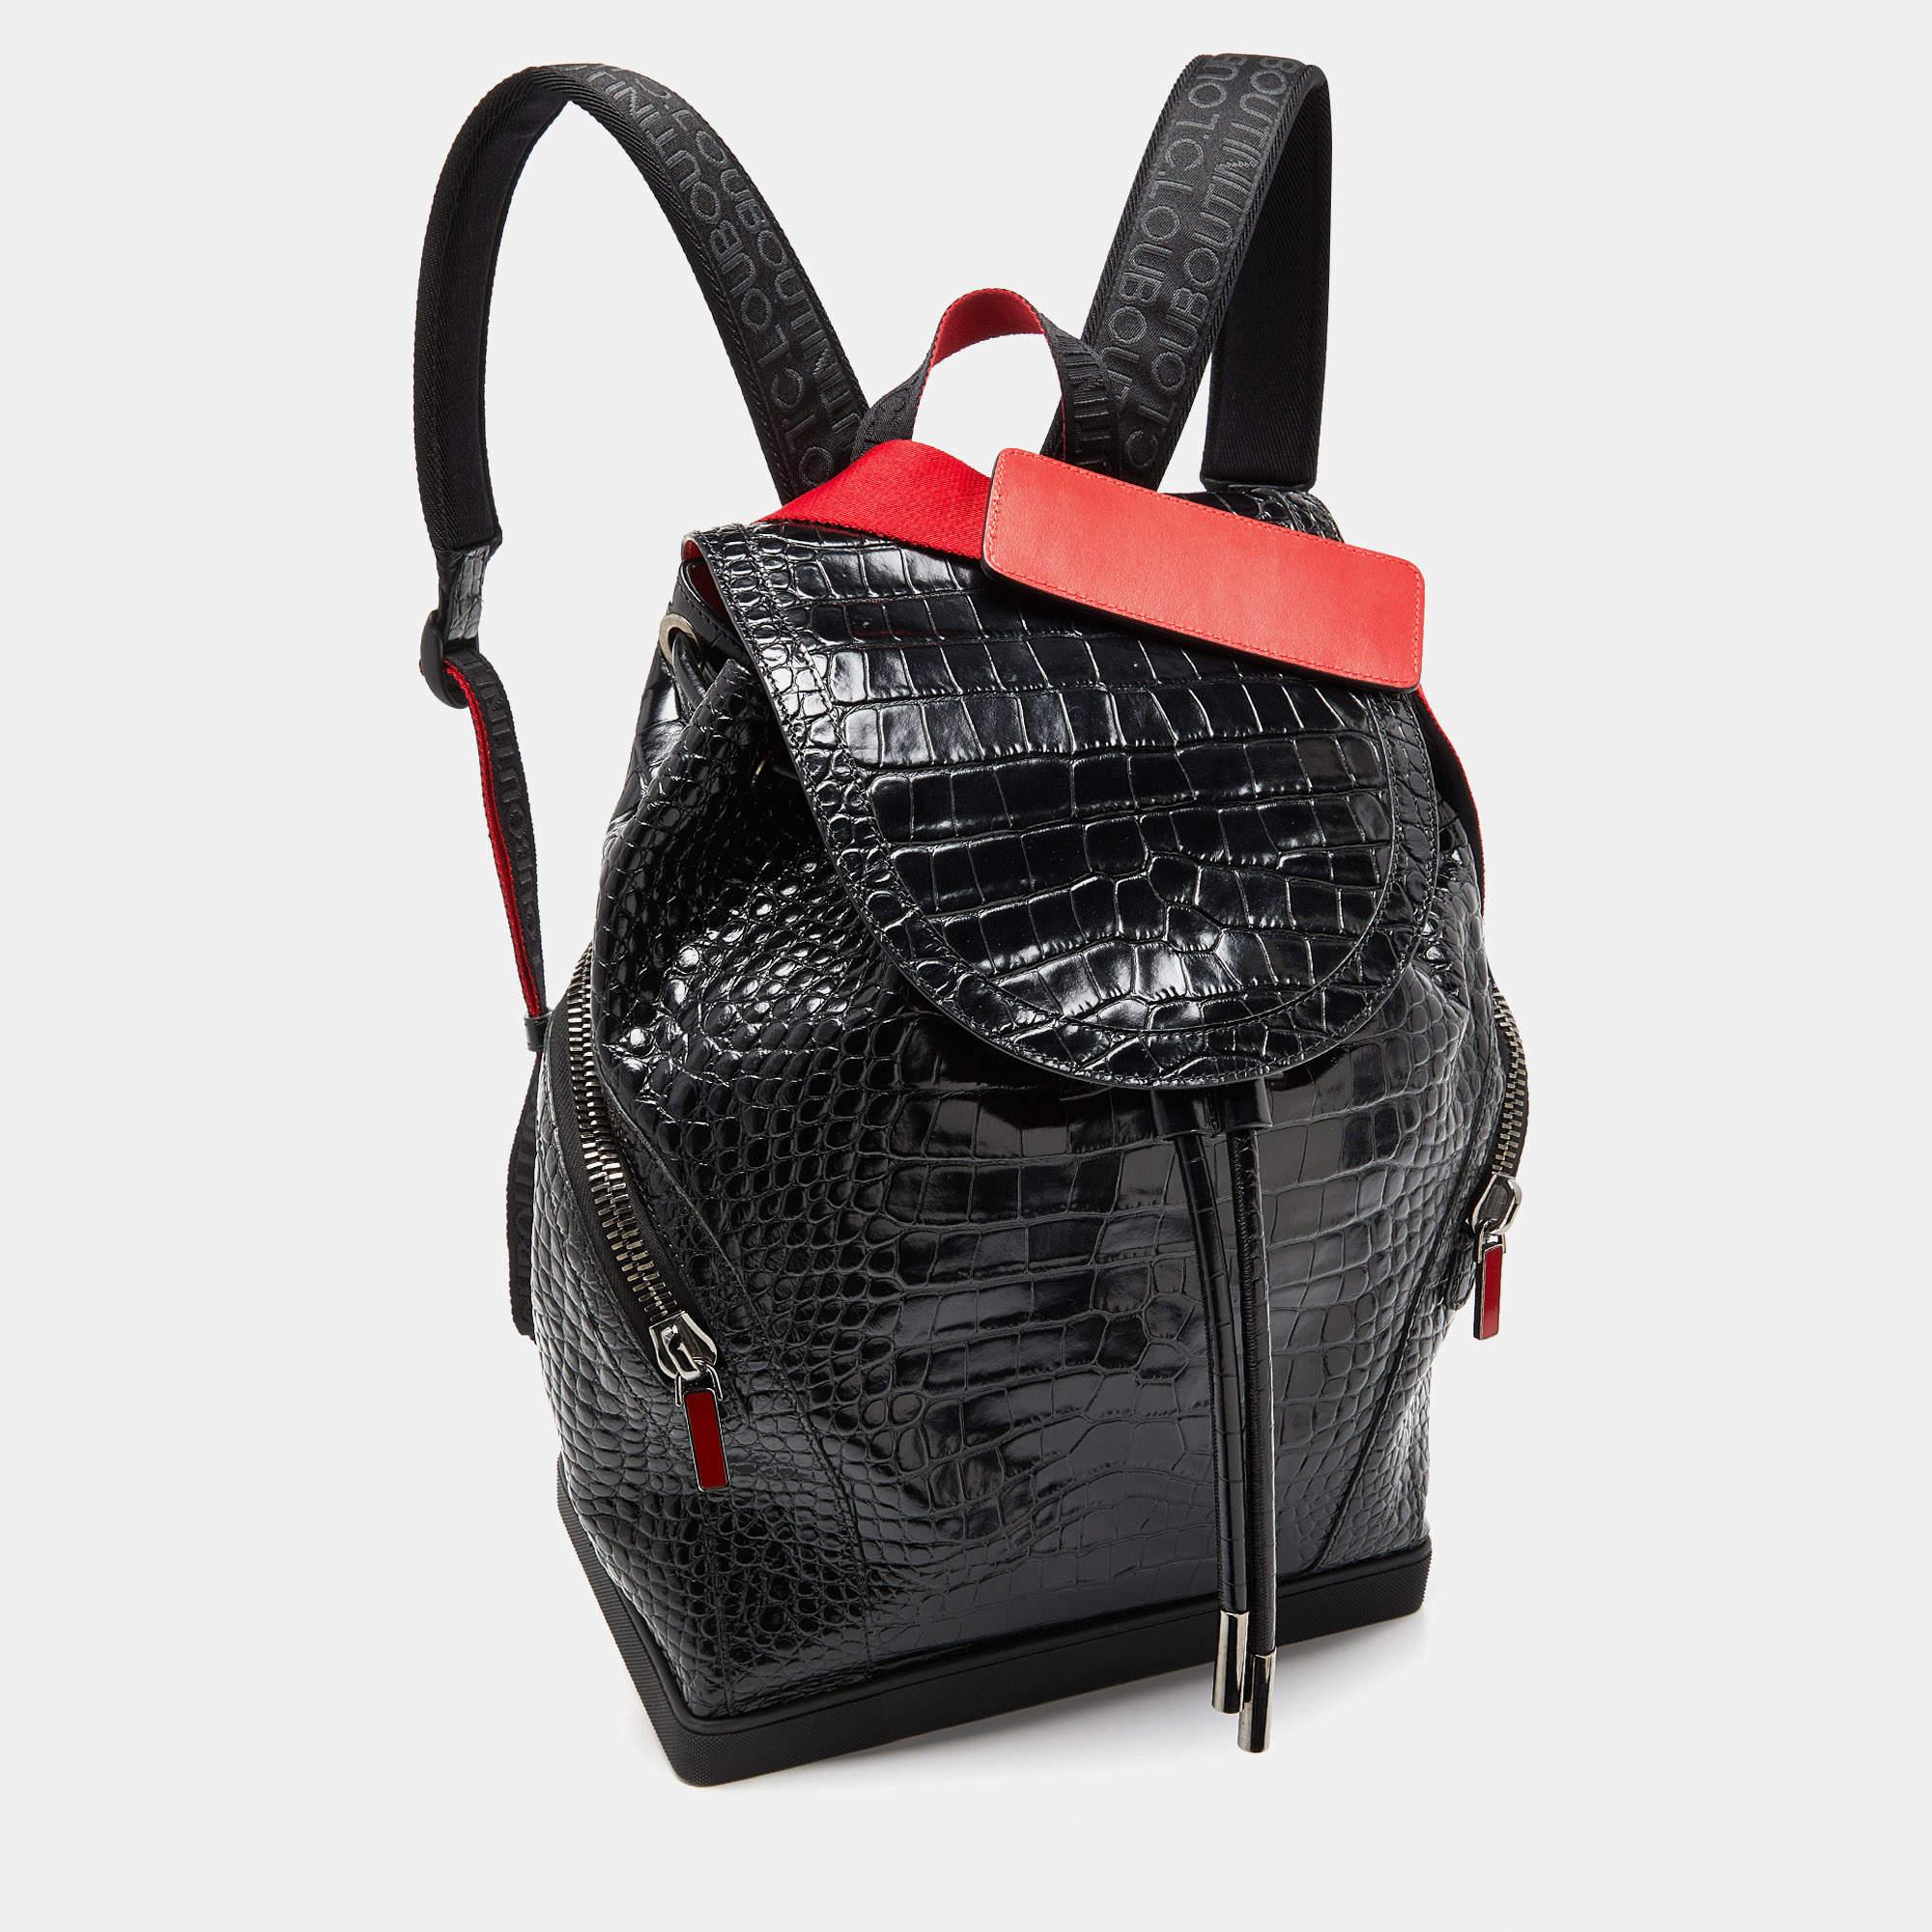 This durable and reliable designer backpack is made with a sleek design. The bag features a well-sized interior. It is complete with a top handle and shoulder straps.

